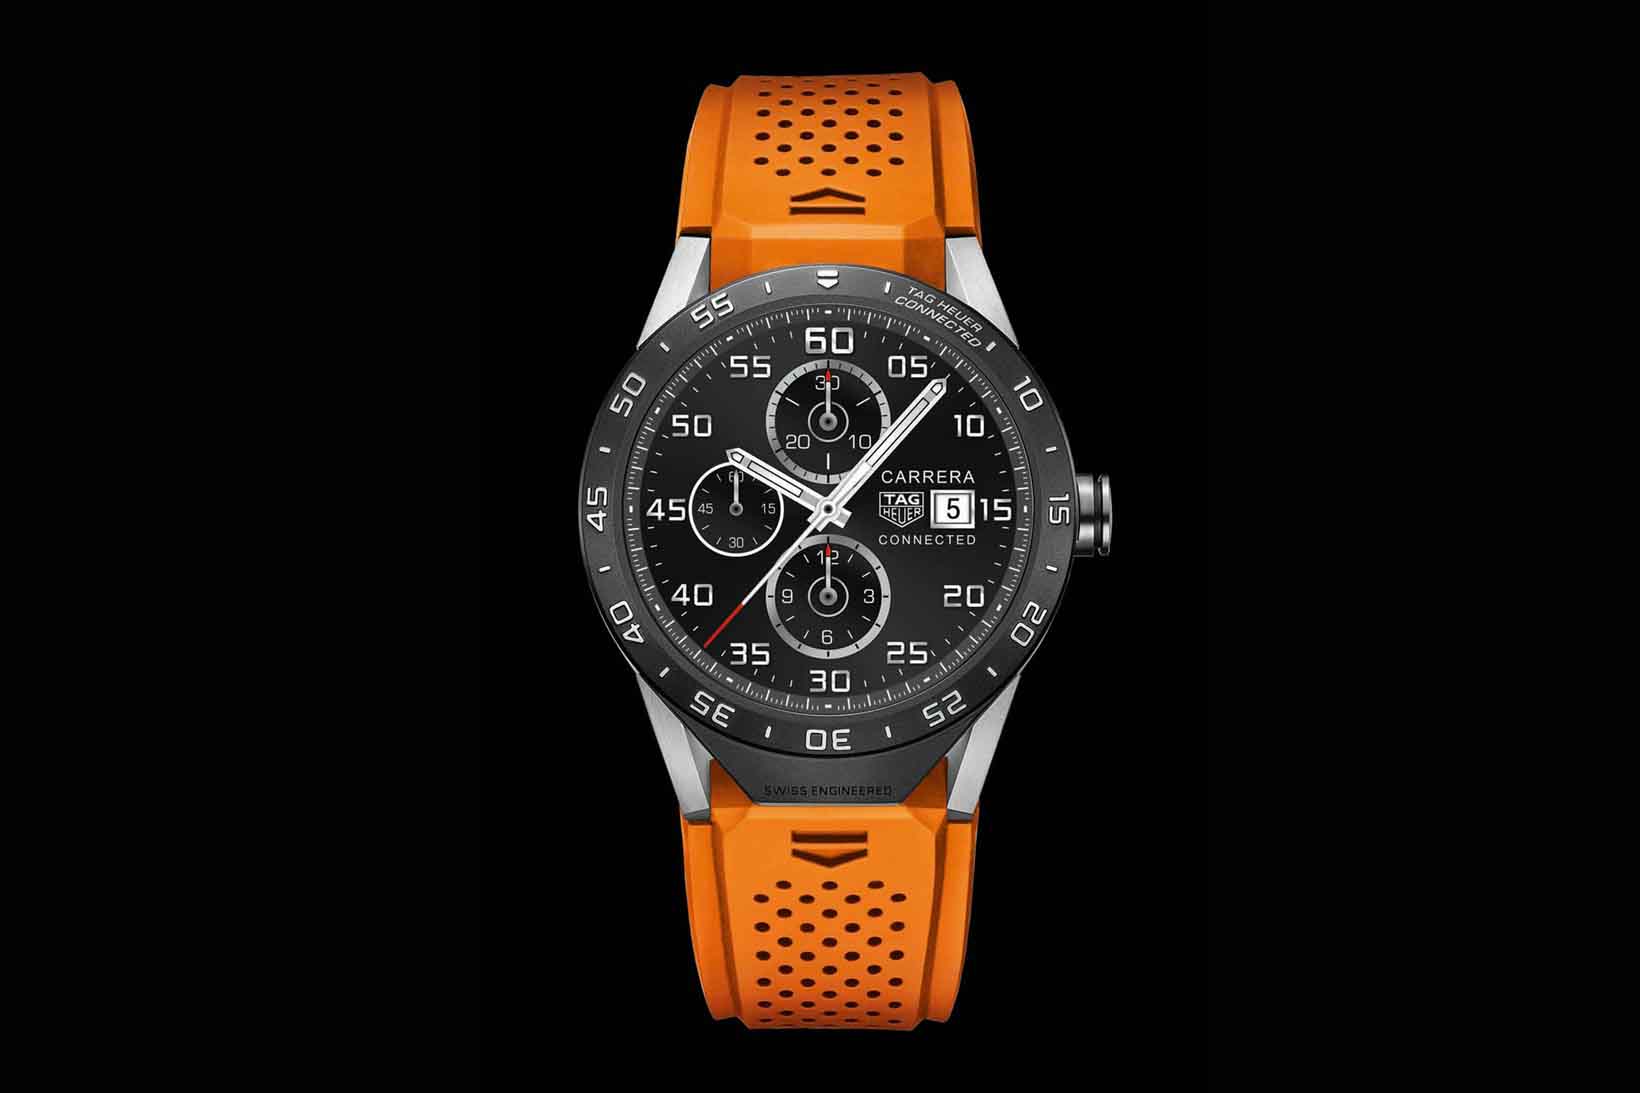 Introducing The TAG Heuer Connected, The First Swiss Luxury Smartwatch